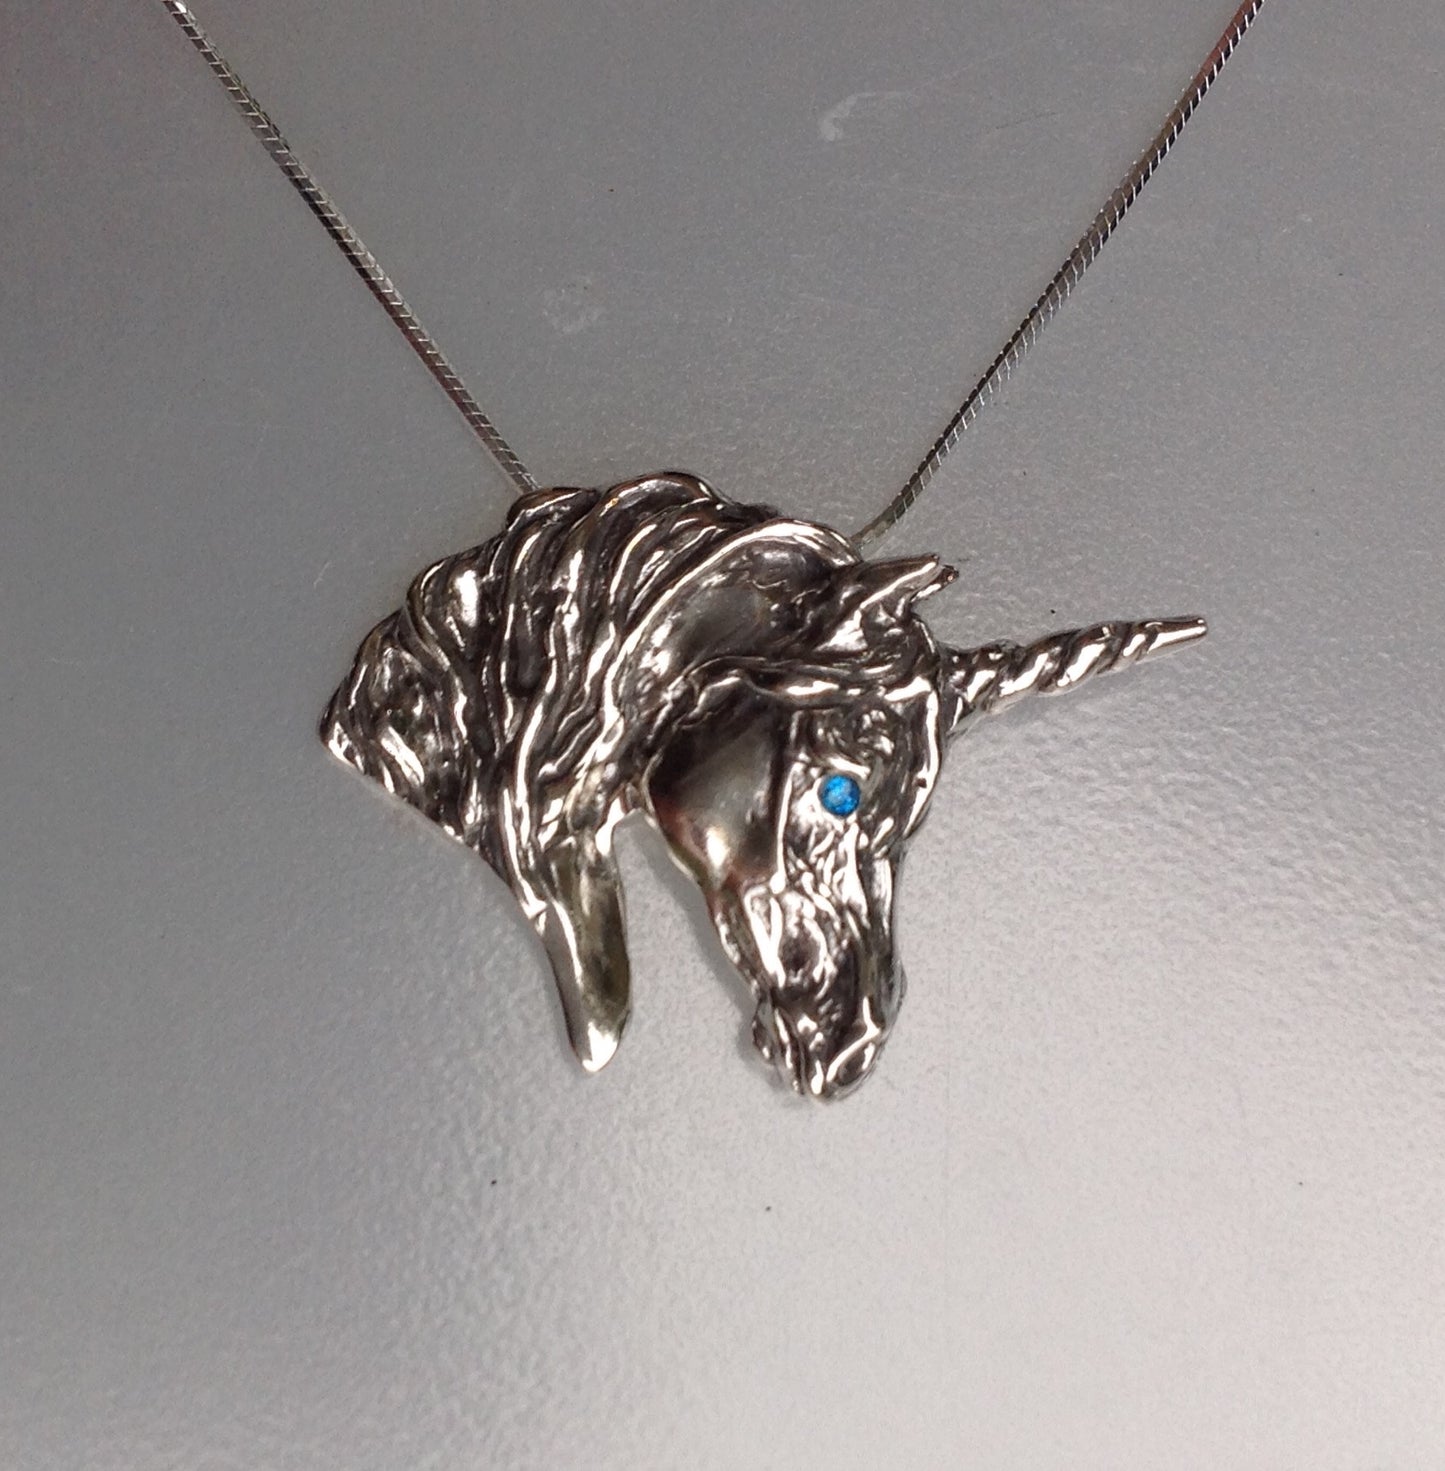 Unicorn Sterling Silver Pendant, stone set eye. Large. Chain included.